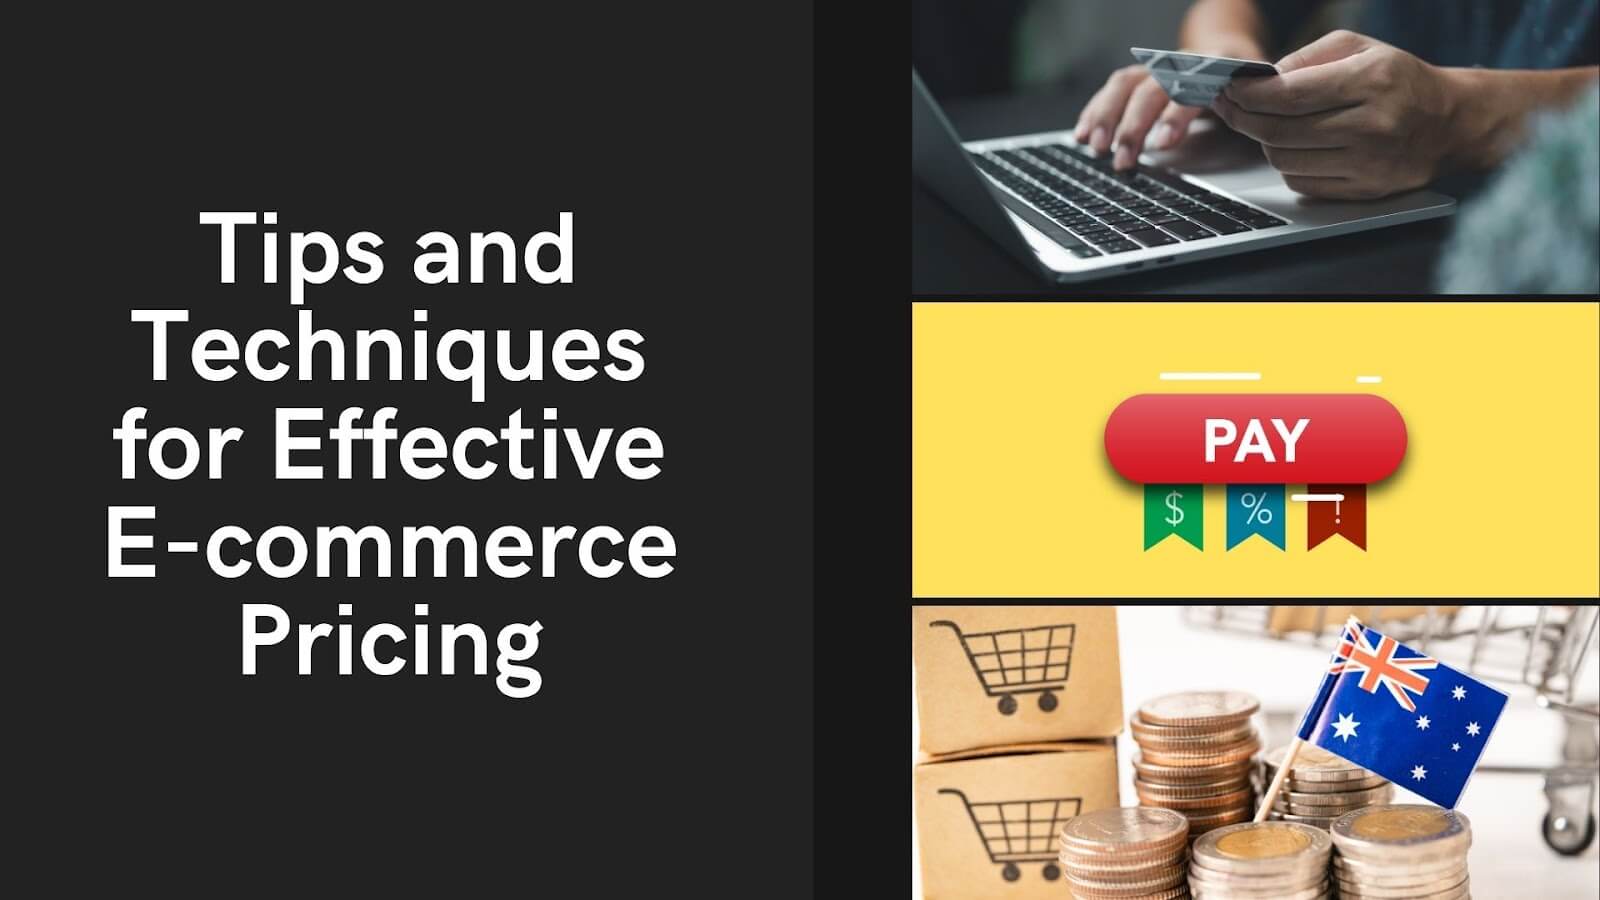 Tips and Techniques for Effective E-commerce Pricing